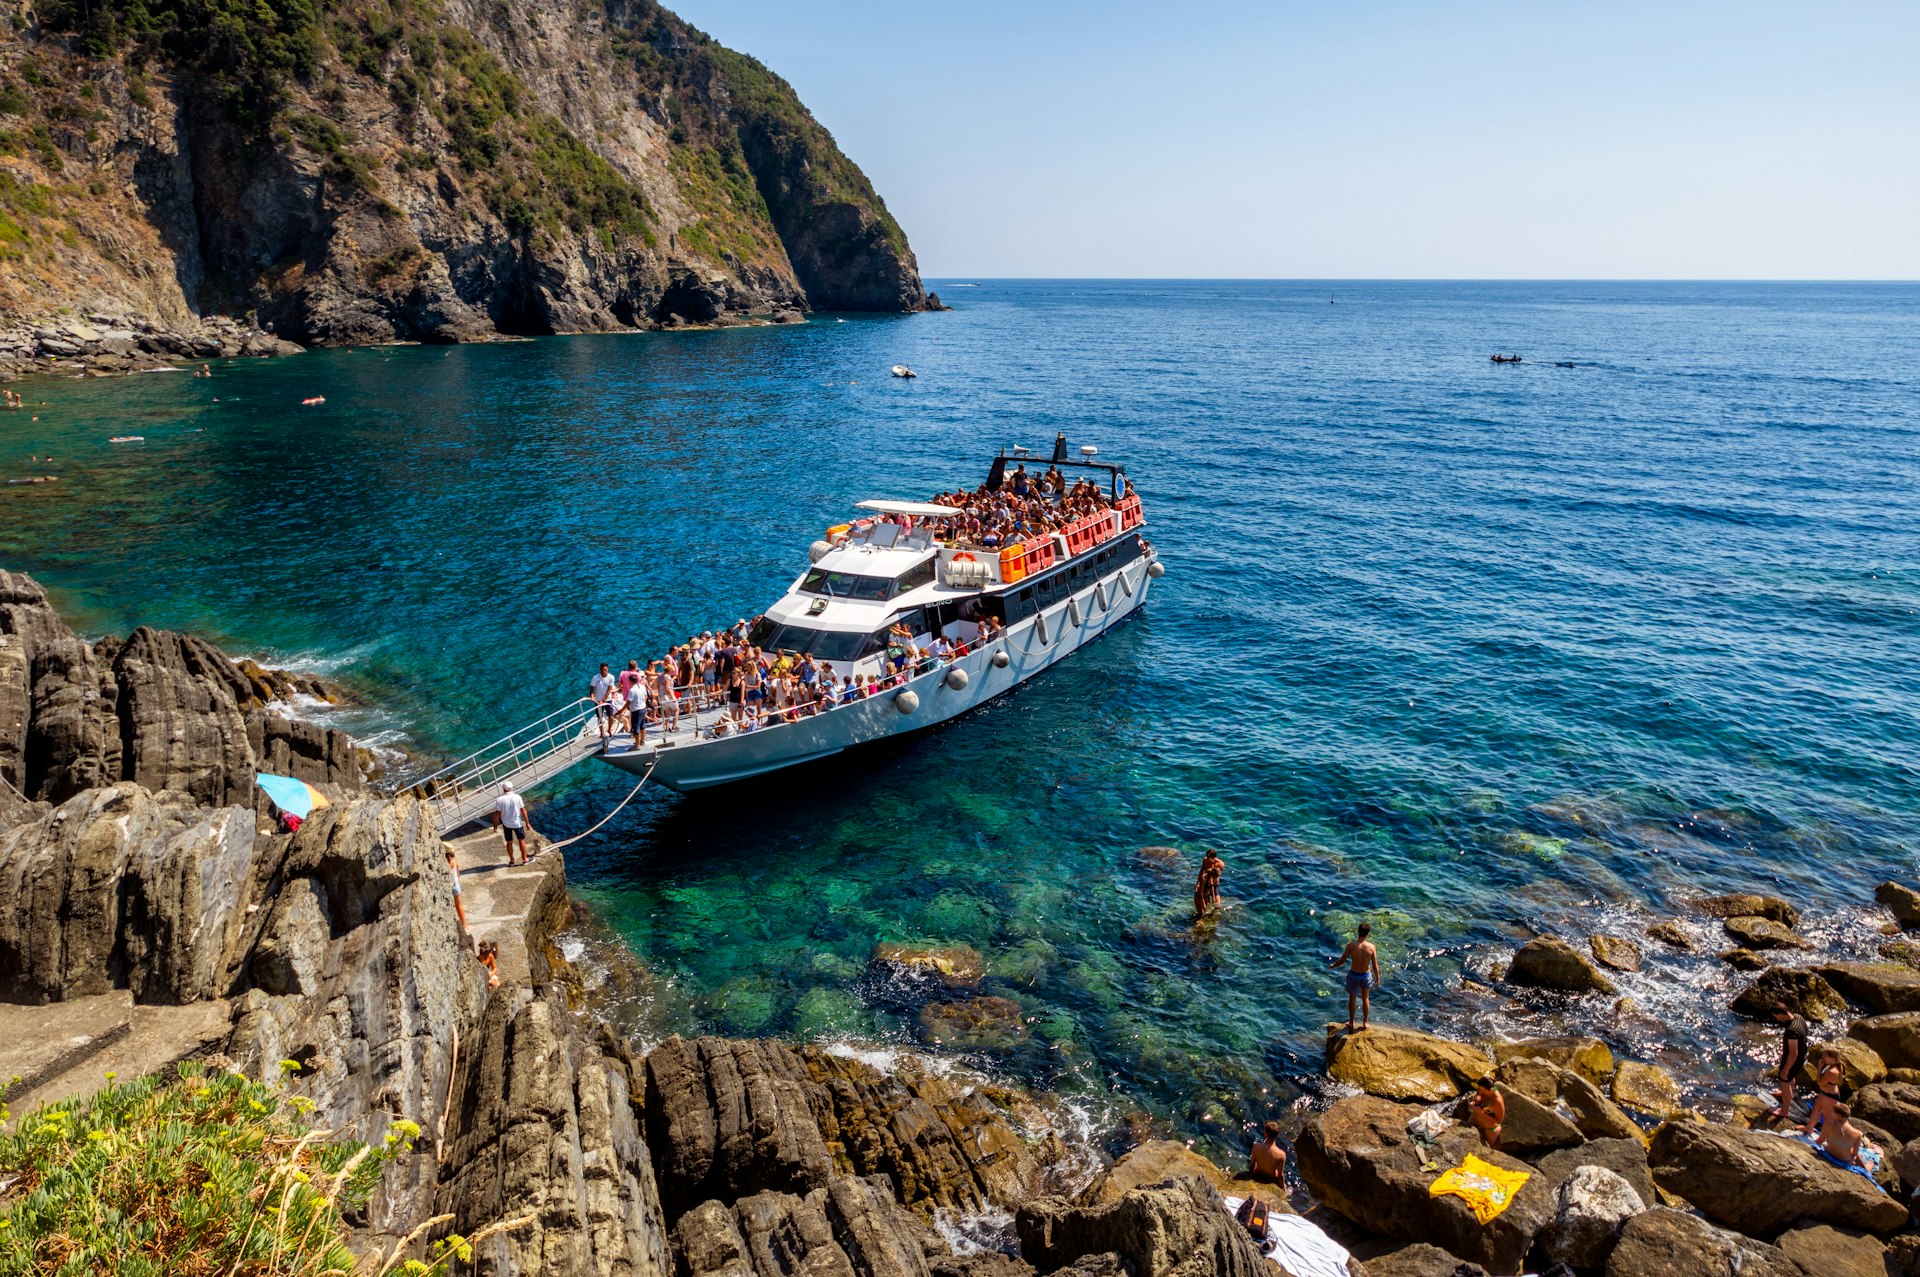 A ferry boat floats in the shallow blue waters off the coast of Riomaggiore in Cinque Terre. The boat is very busy with many people up on deck.